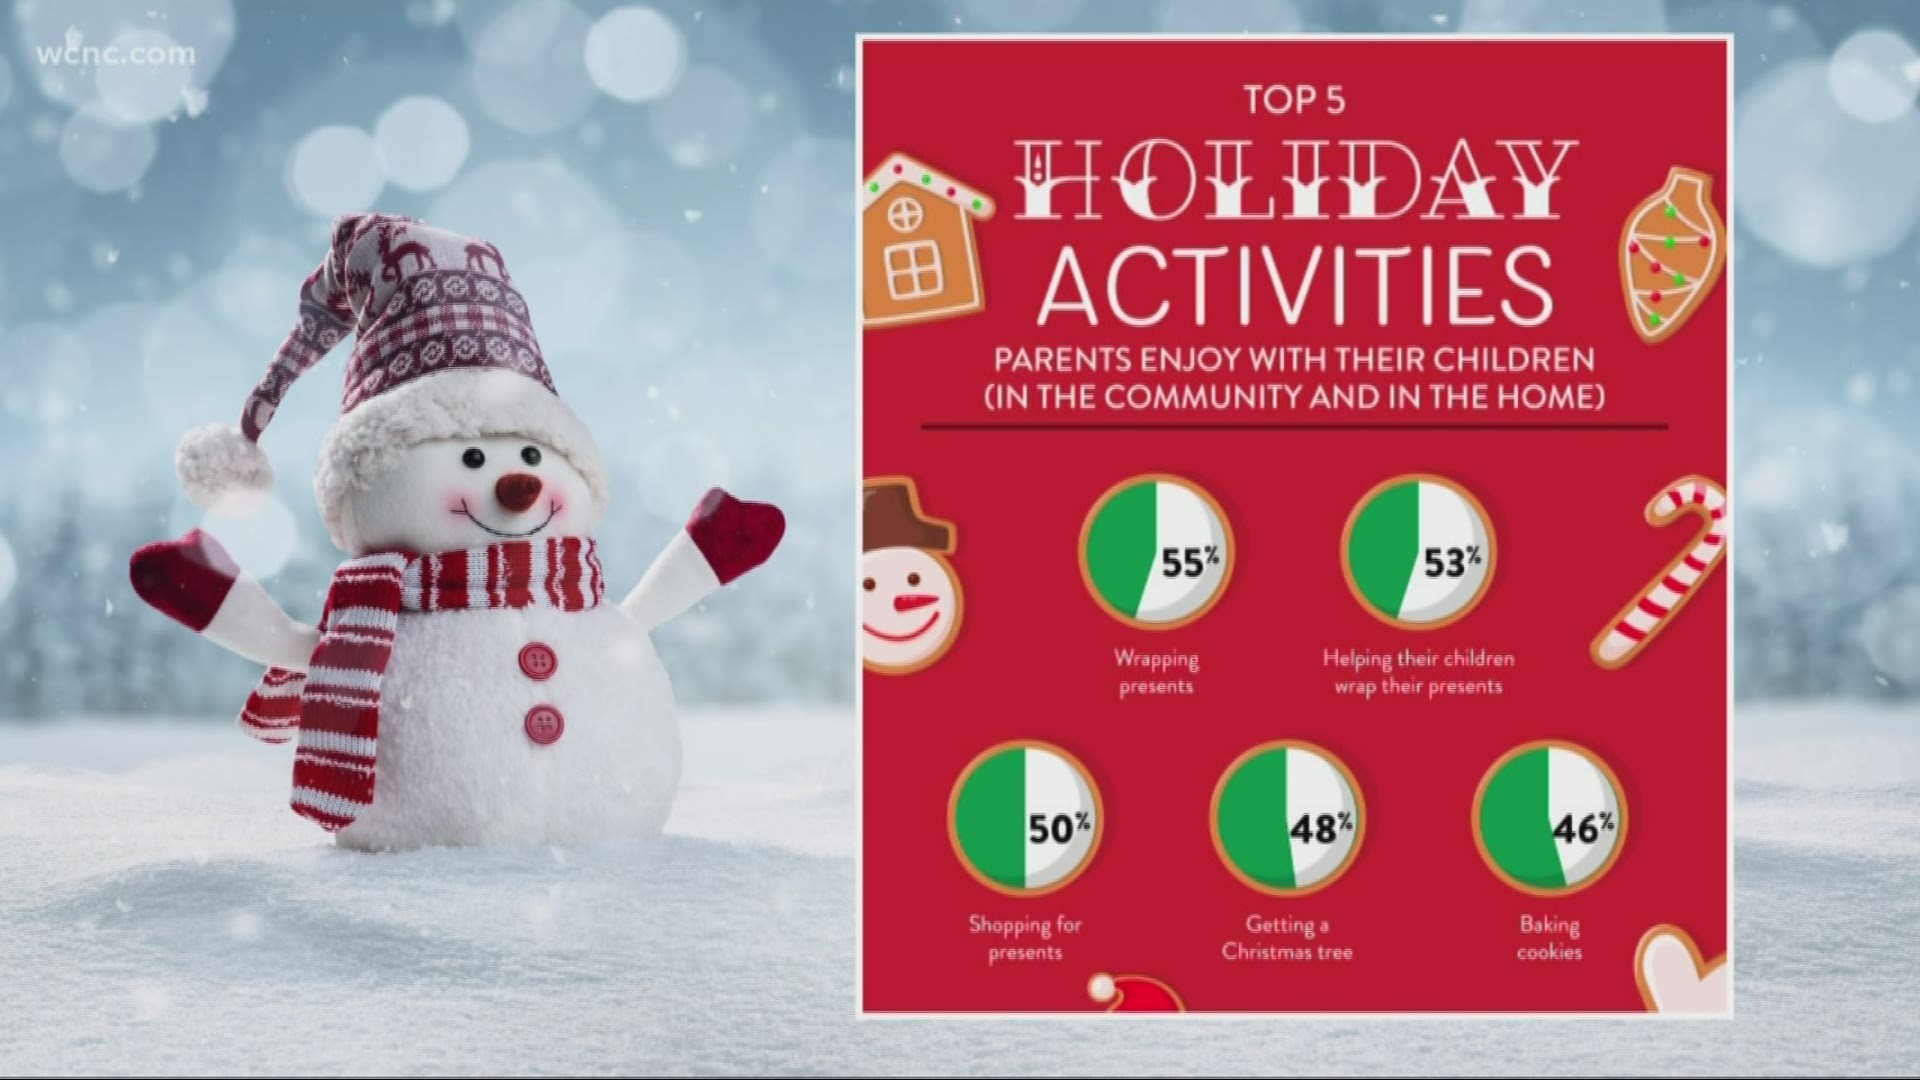 What's your favorite thing to do during the holidays? According to a new study, parents enjoy wrapping presents for their children more than anything.